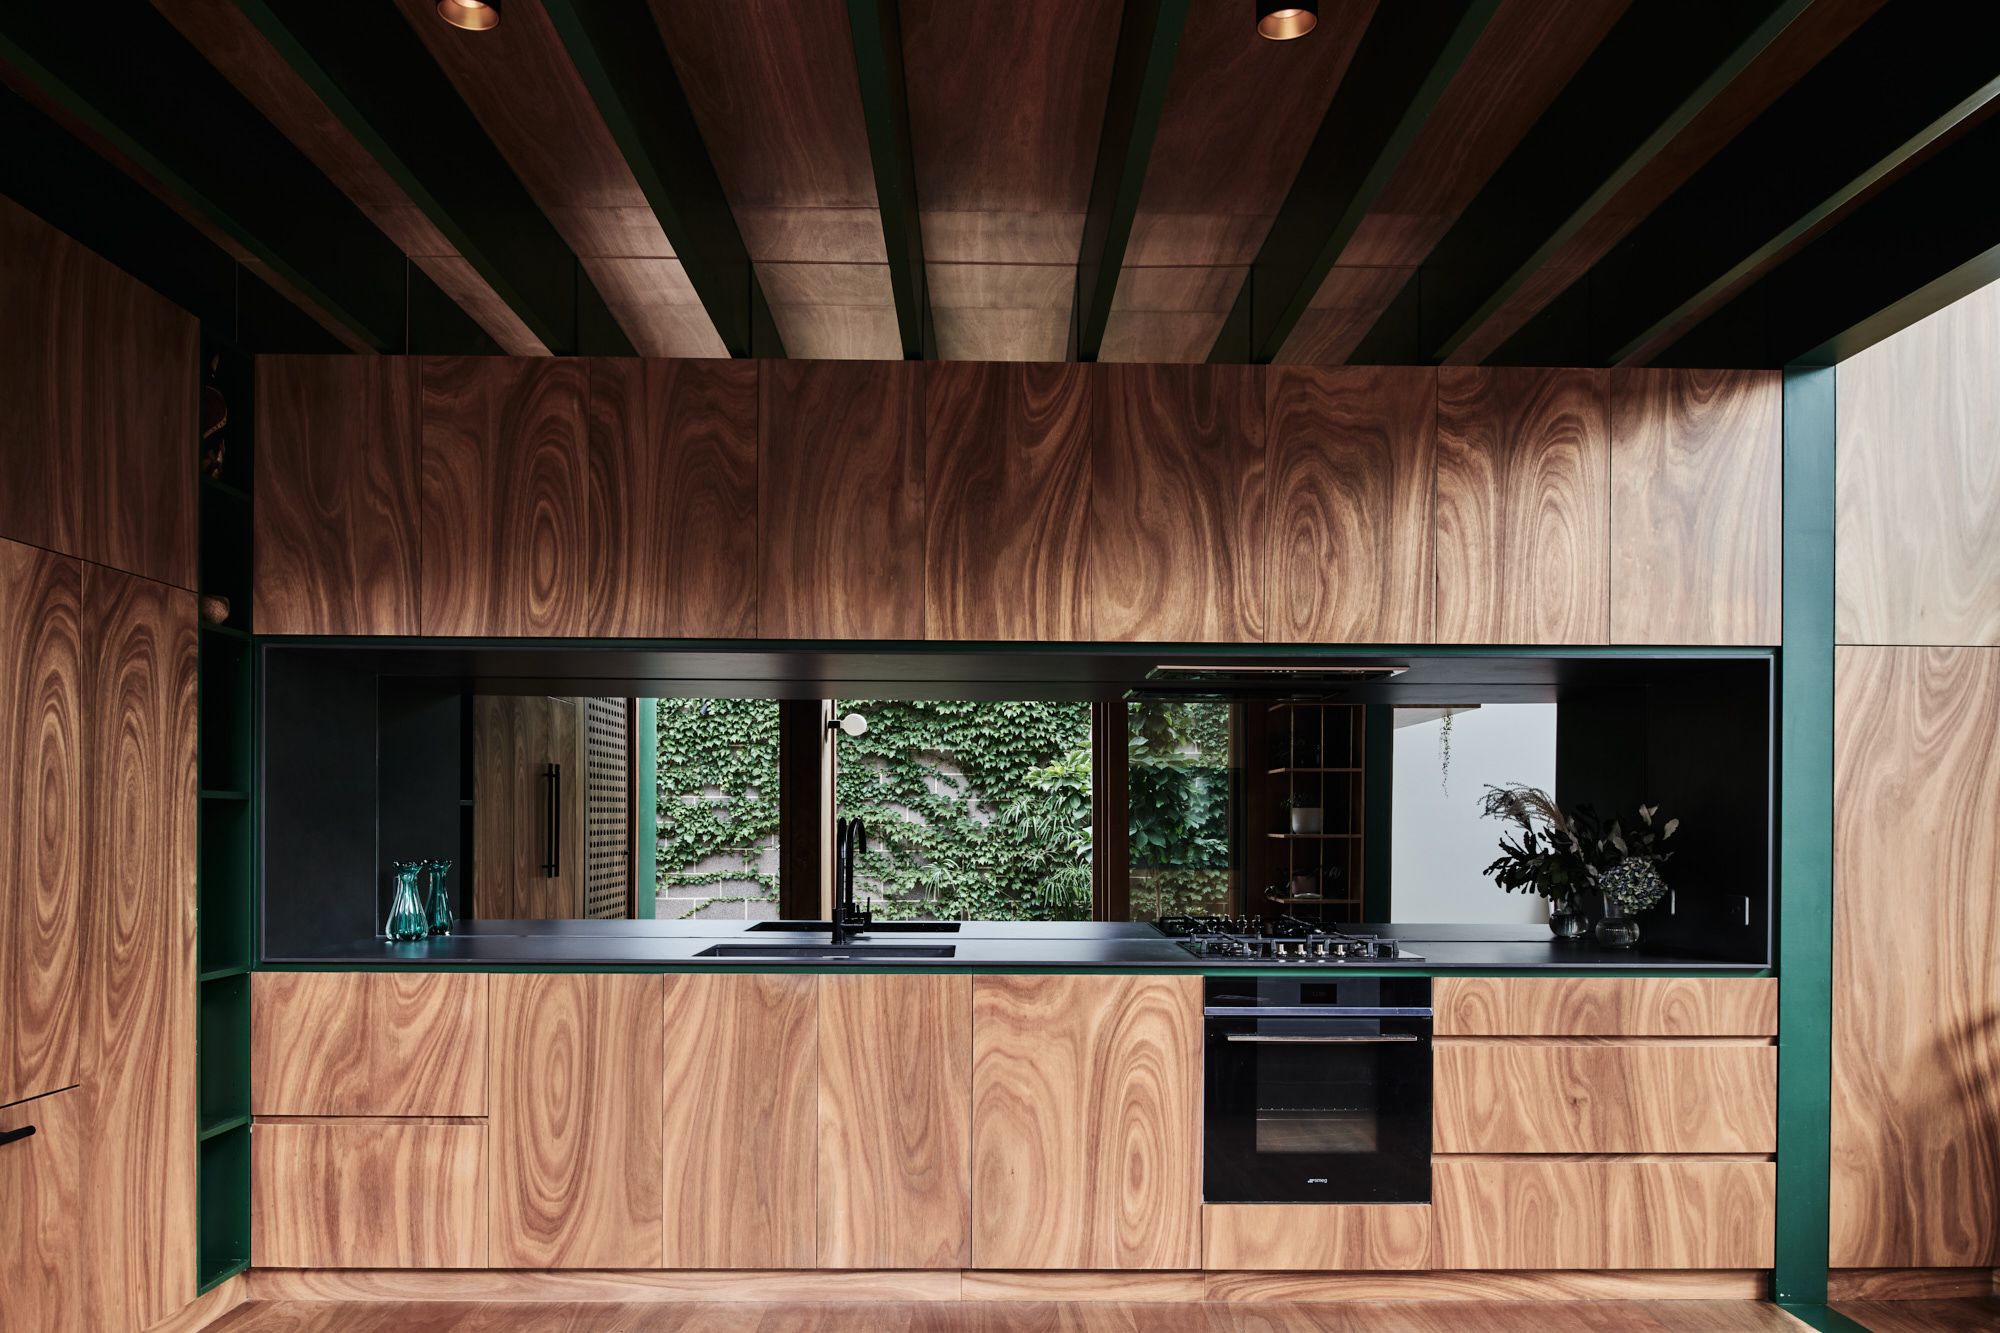 Hot Top Peak by FIGR Architecture. Kitchen area adorned with spotted gum plywood.